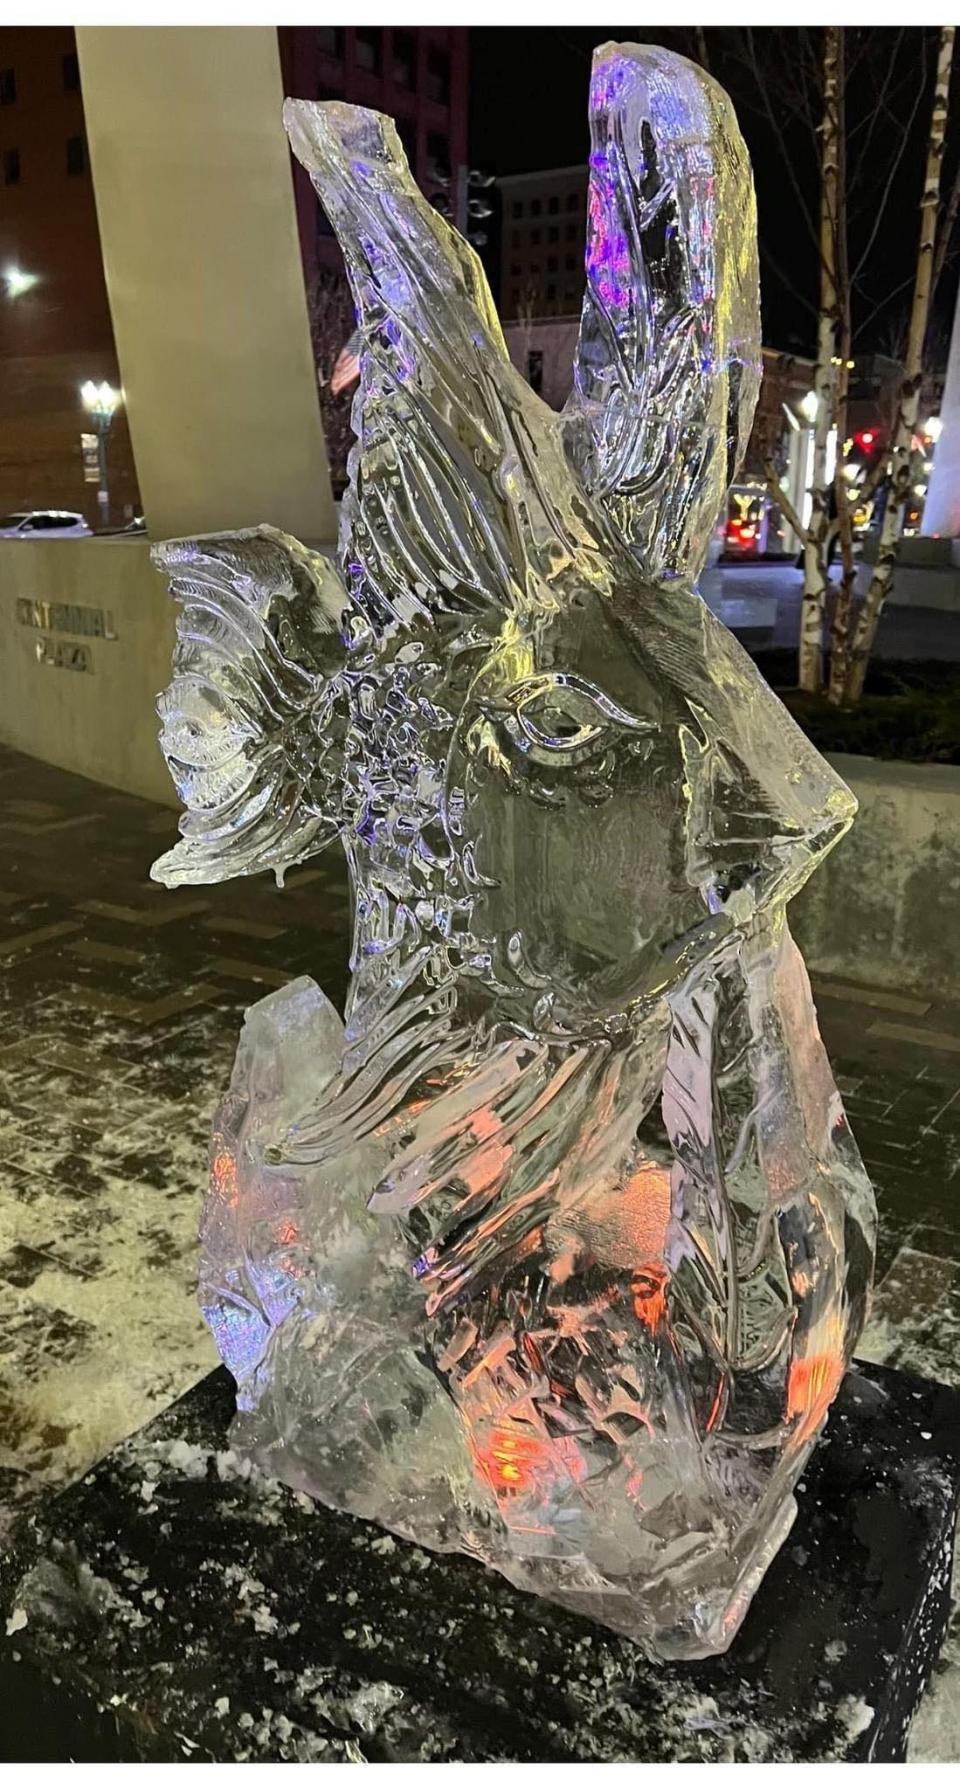 Ice sculpting will take place at 20 locations in downtown Canton during January's First Friday activities this week. The event is 5 to 9 p.m.